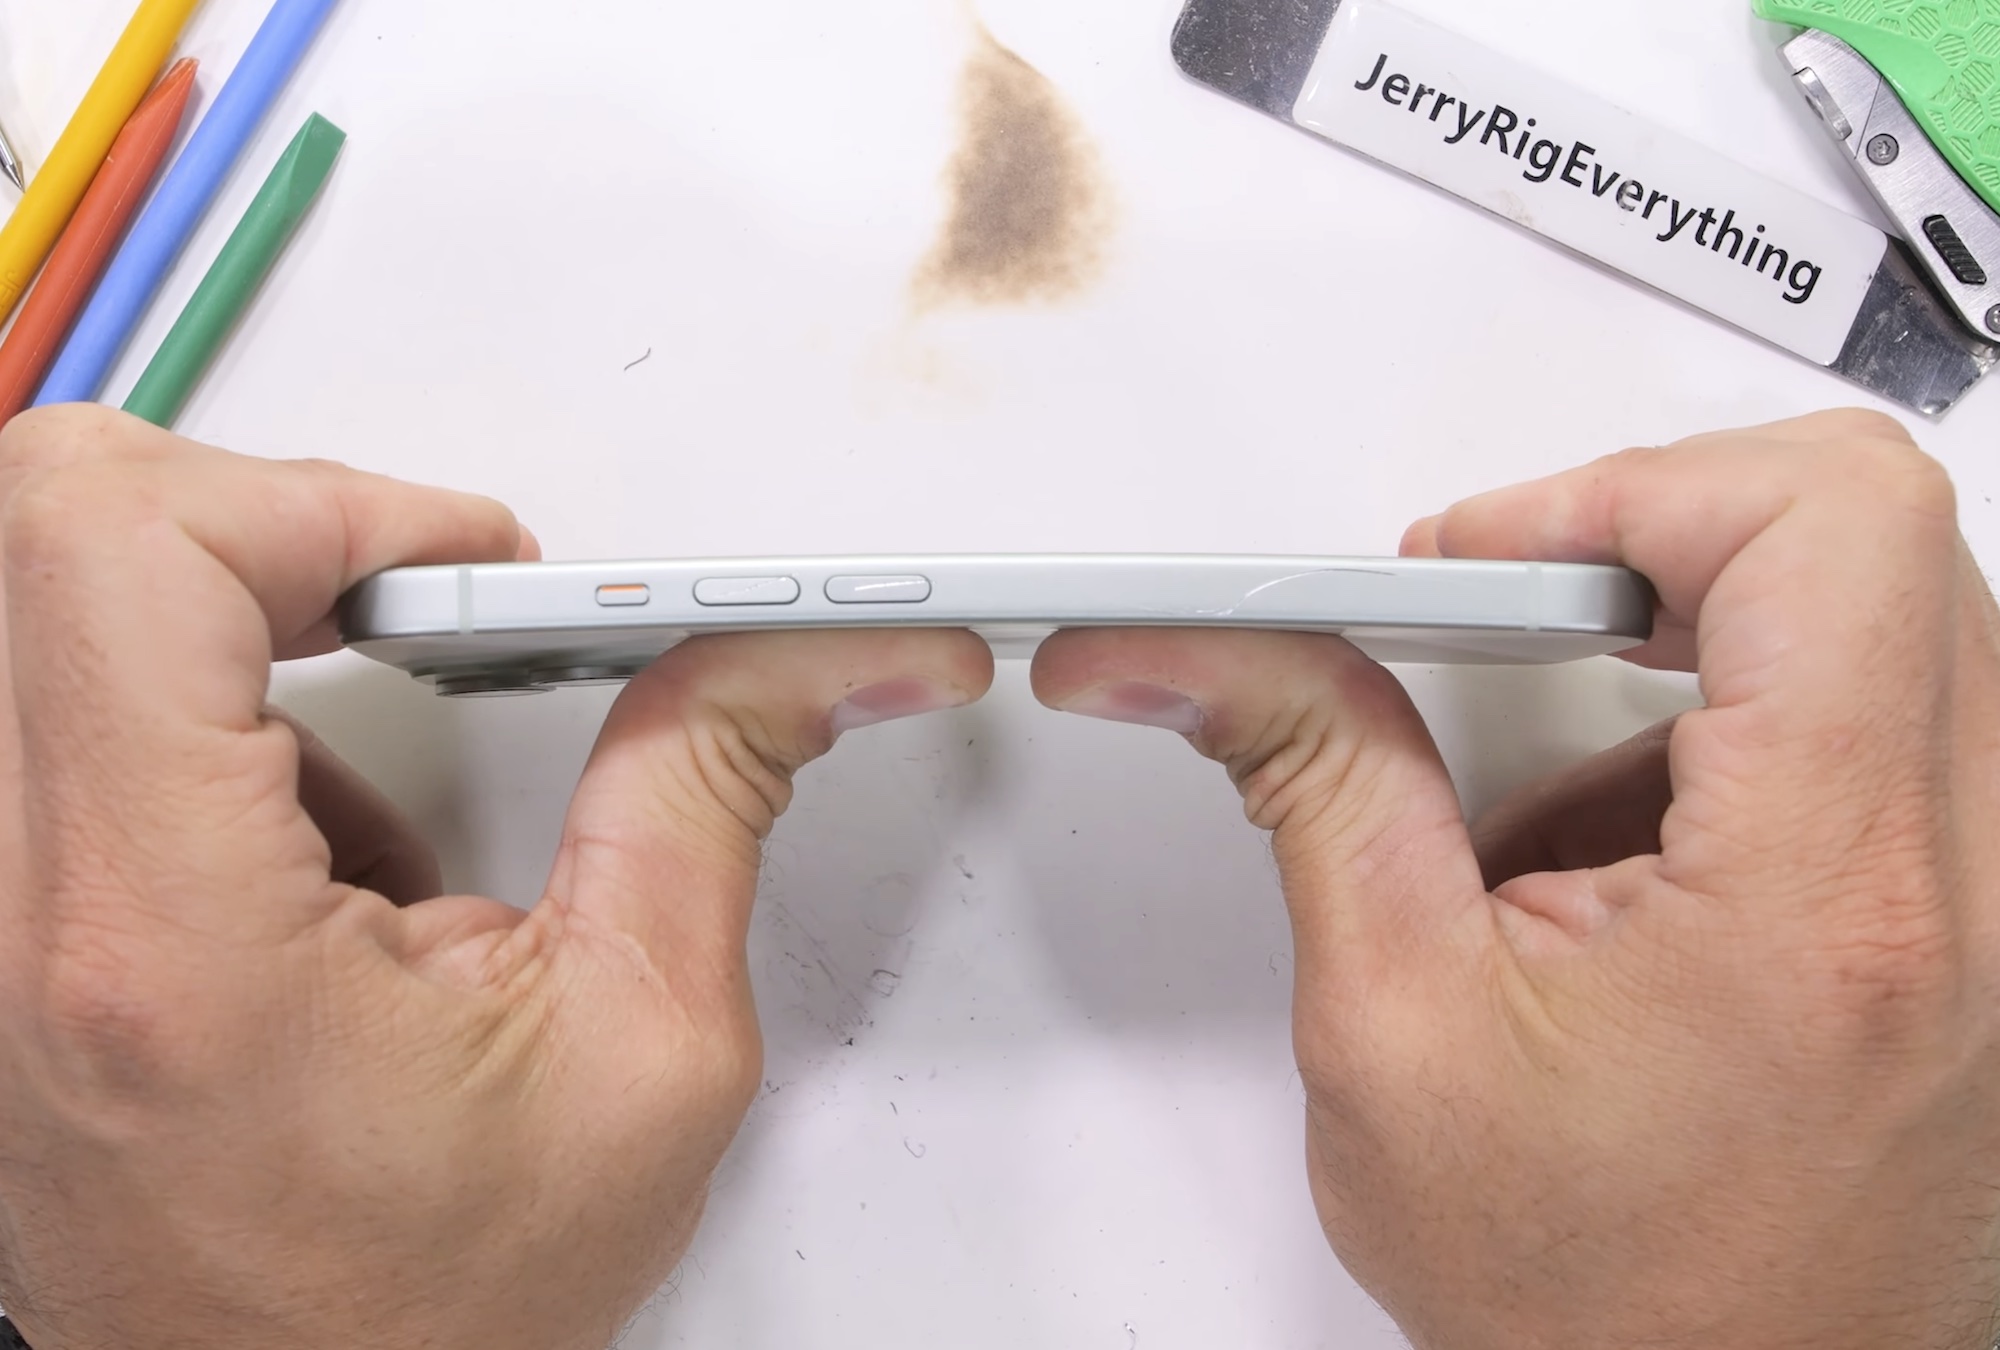 YouTuber Zack Nelson bending an iPhone 15 to test its strength.